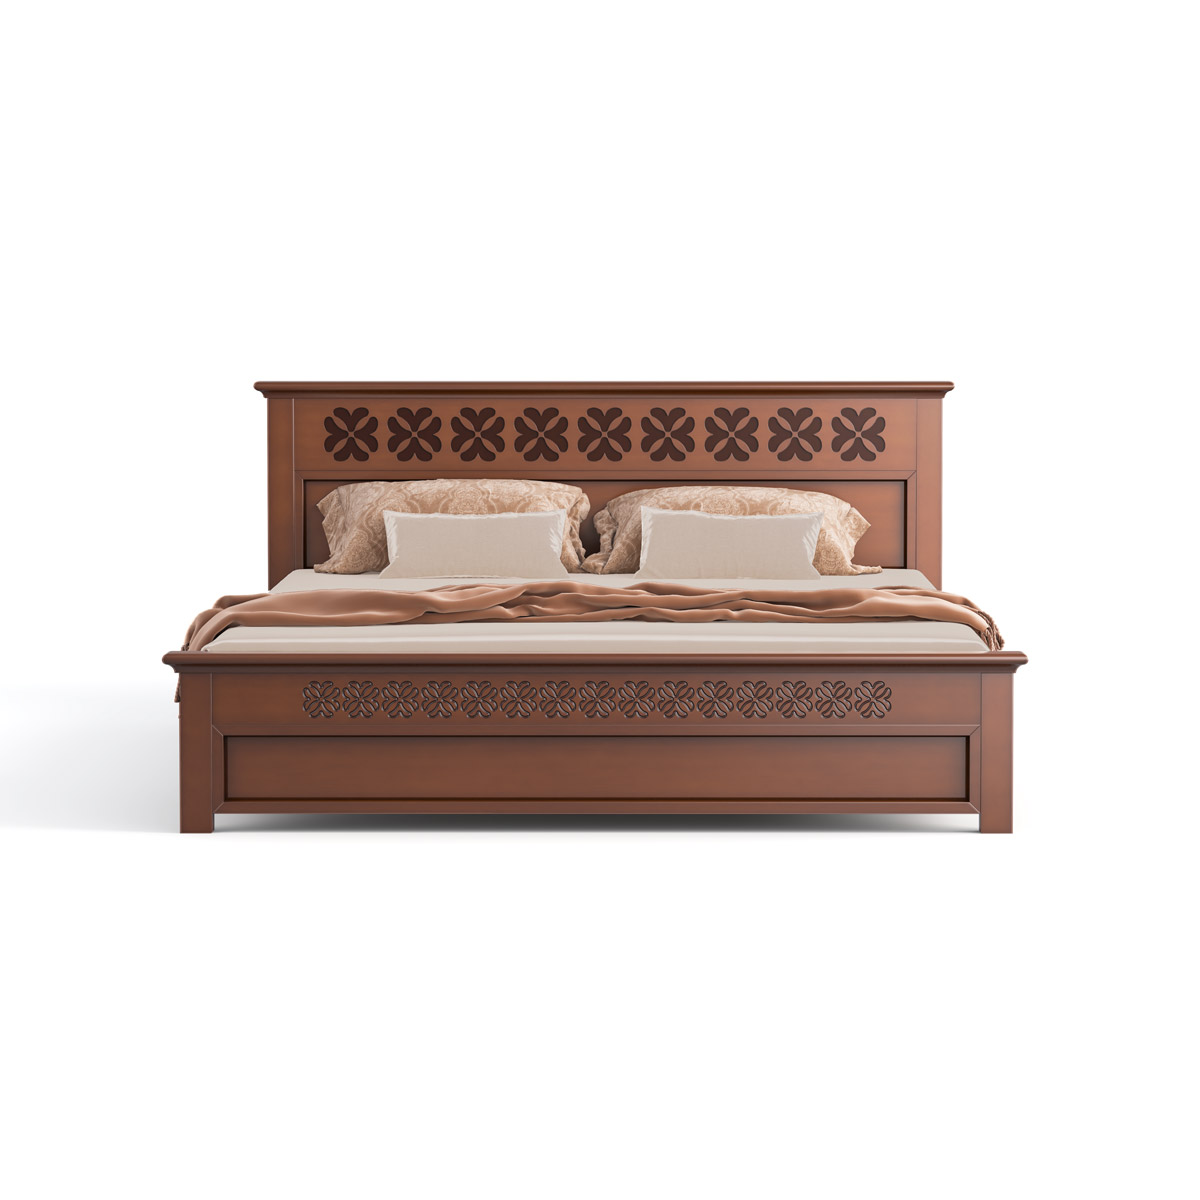 WOODEN BED- FLORIDA BDH-371-3-1-20 (King Bed) 